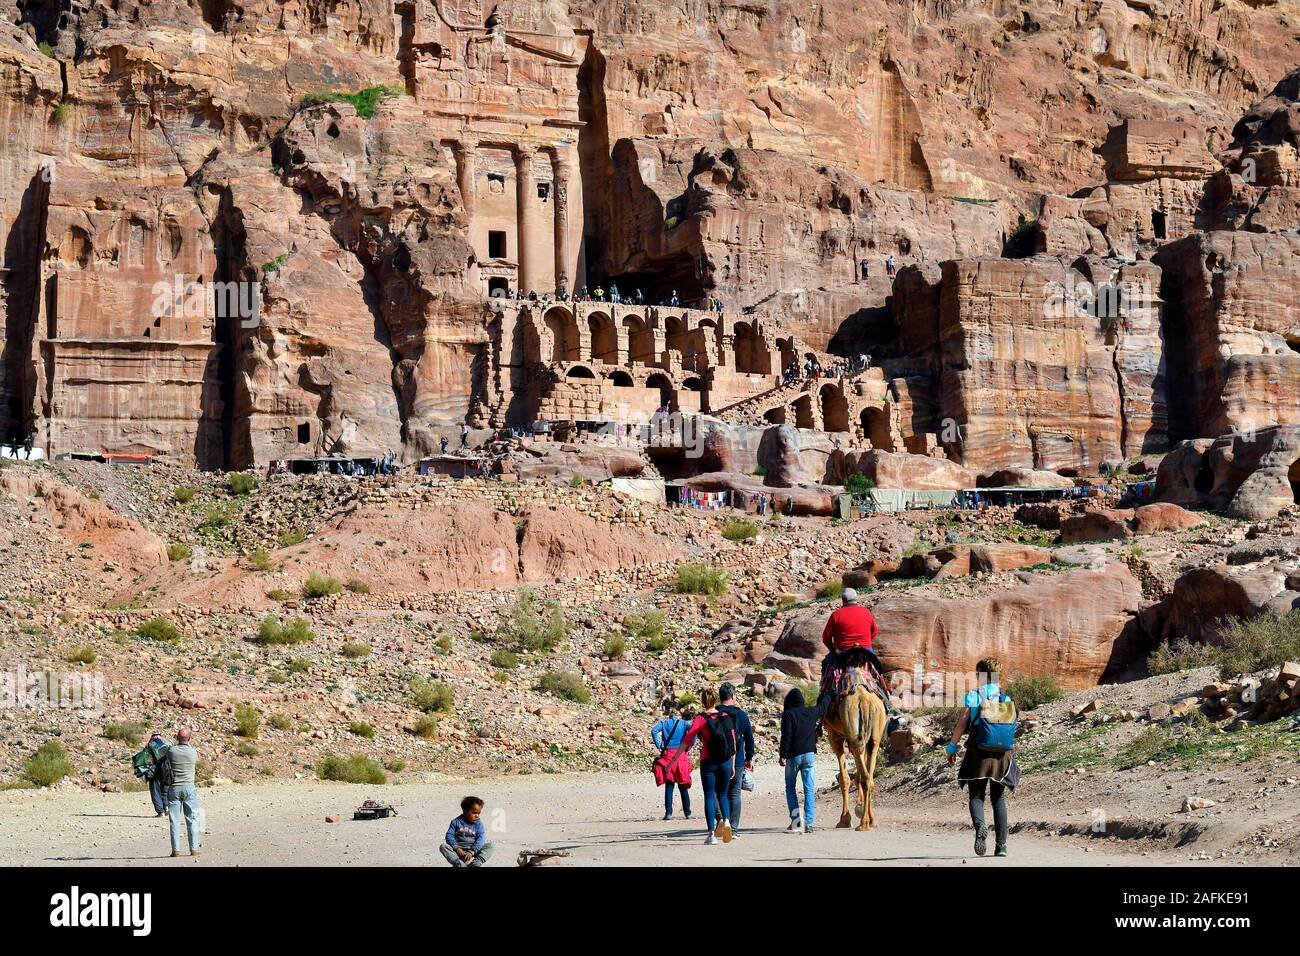 Petra, Jordan - March 06, 2019: Unidentified people at UNESCO World heritage site of ancient Petra with royal tombs in background Stock Photo